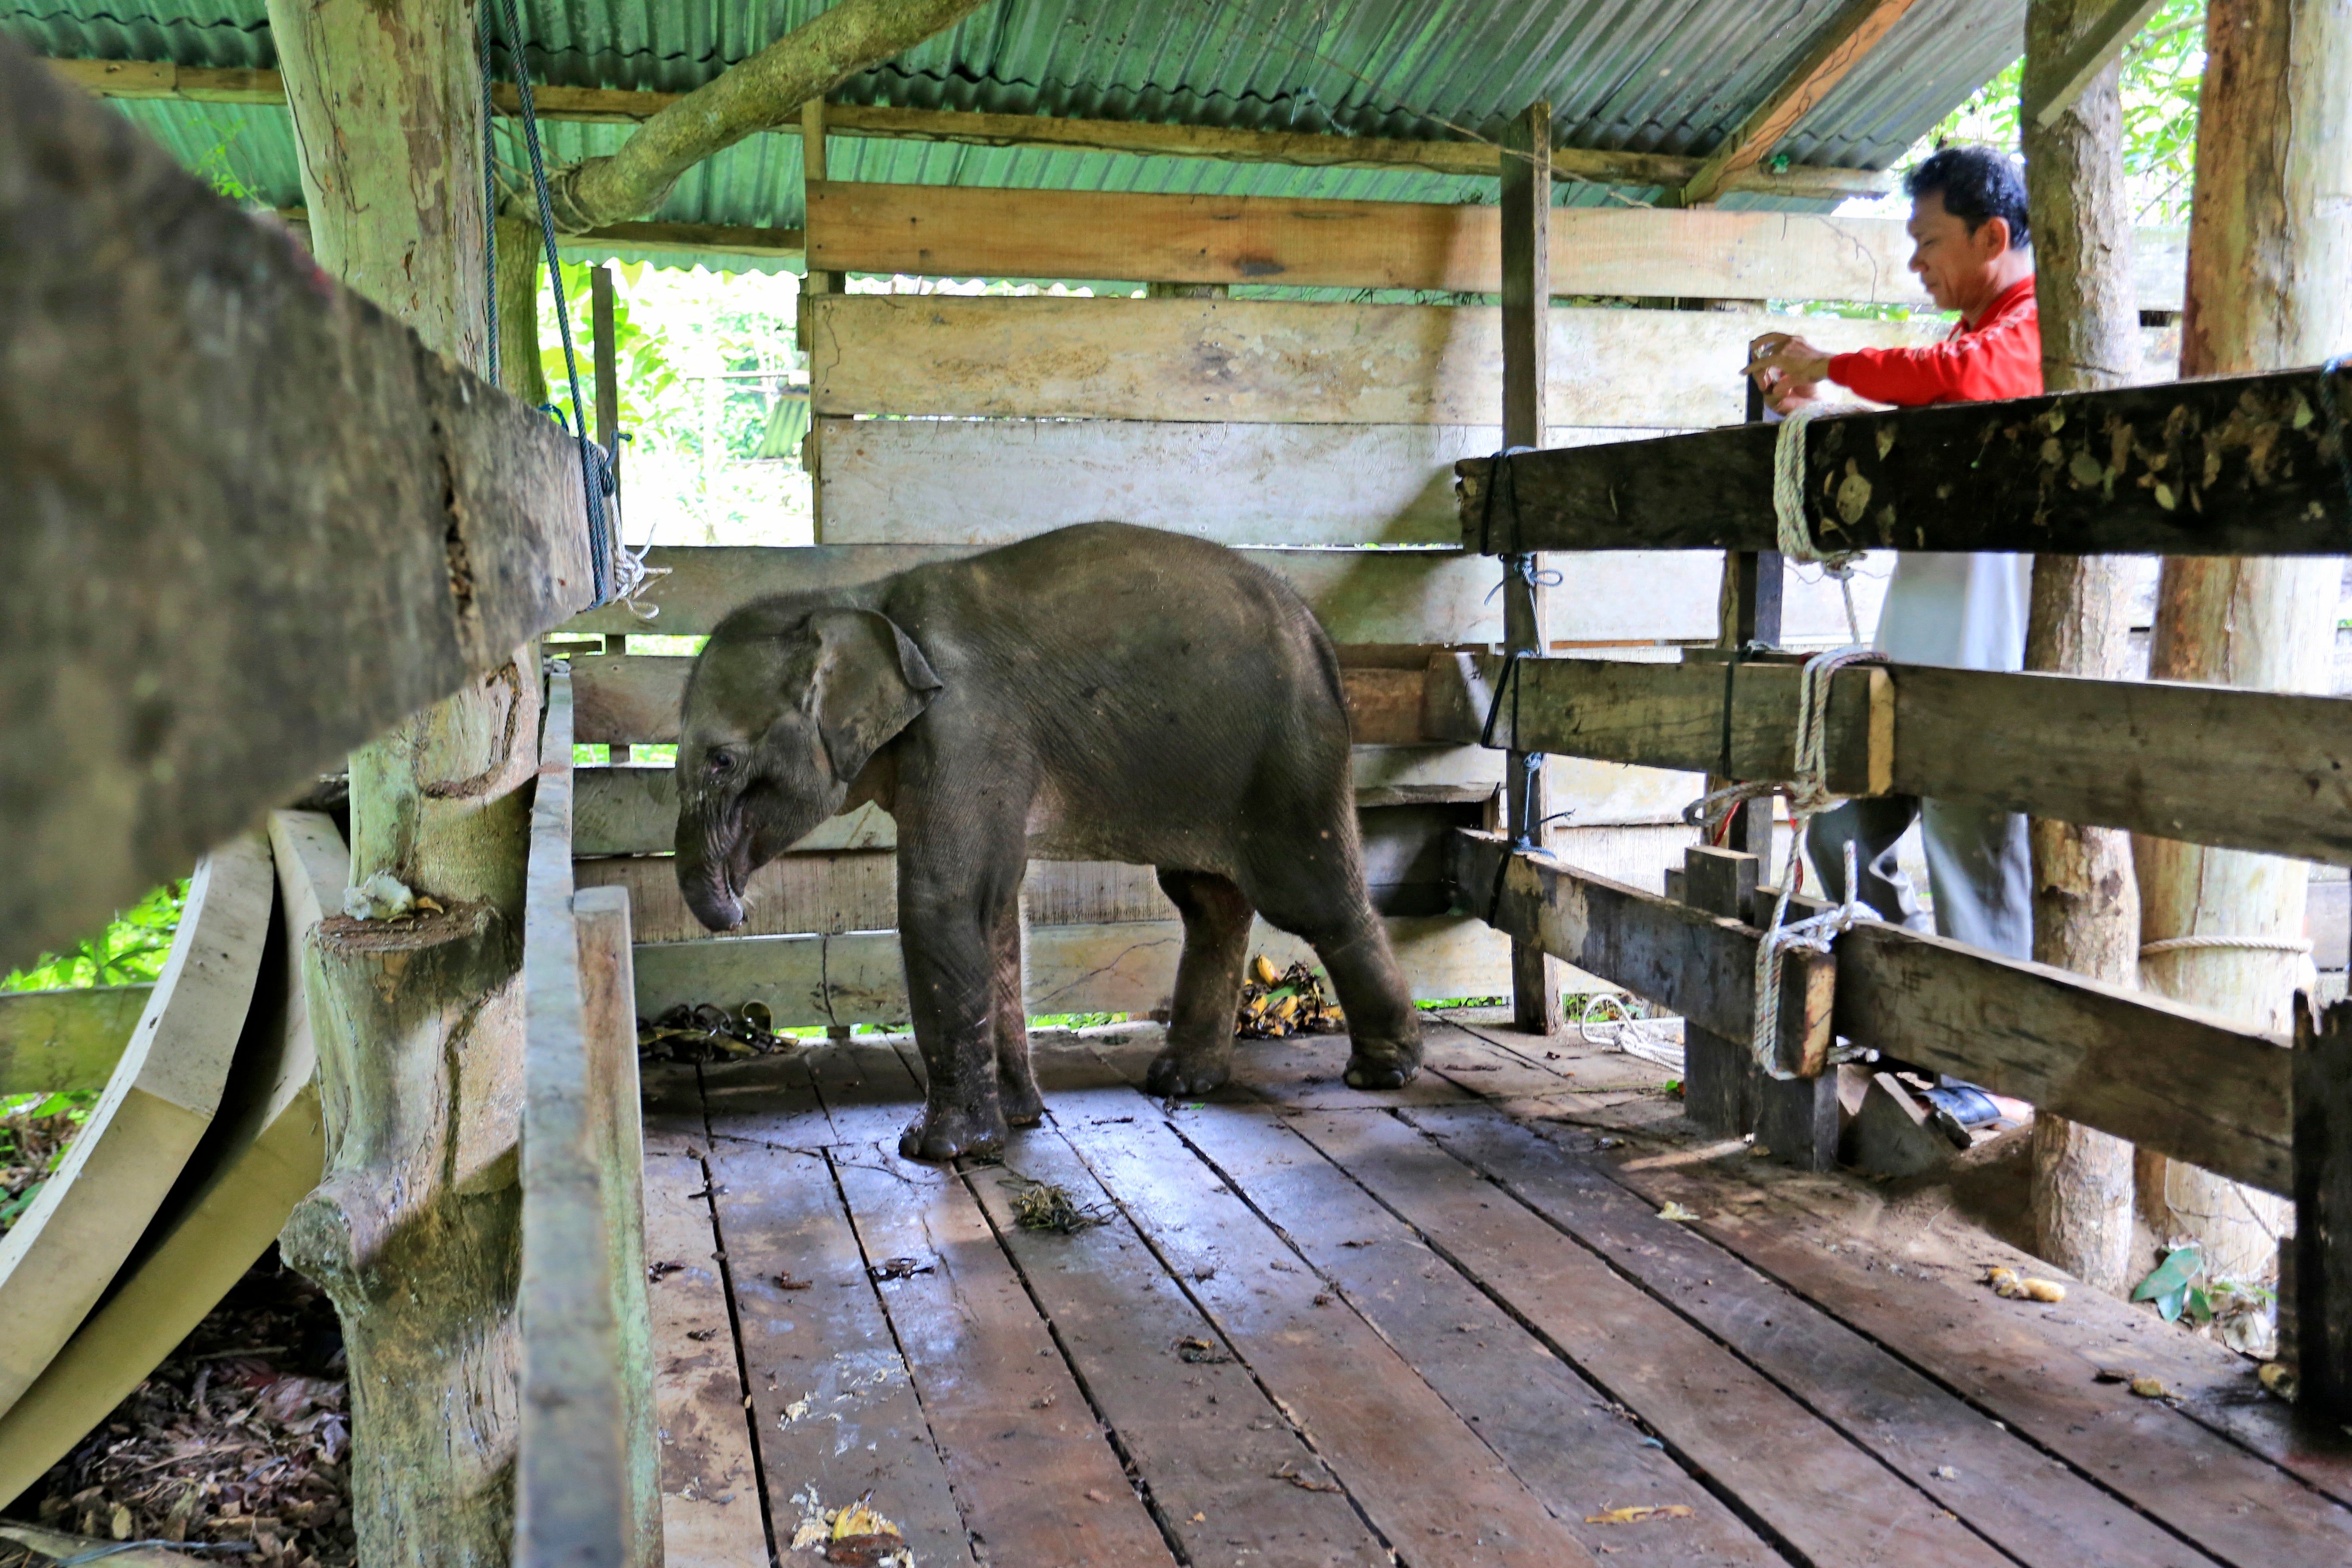 A Sumatran elephant calf that lost half of its trunk, is treated at an elephant conservation centre in Saree, Aceh Besar, Indonesia.